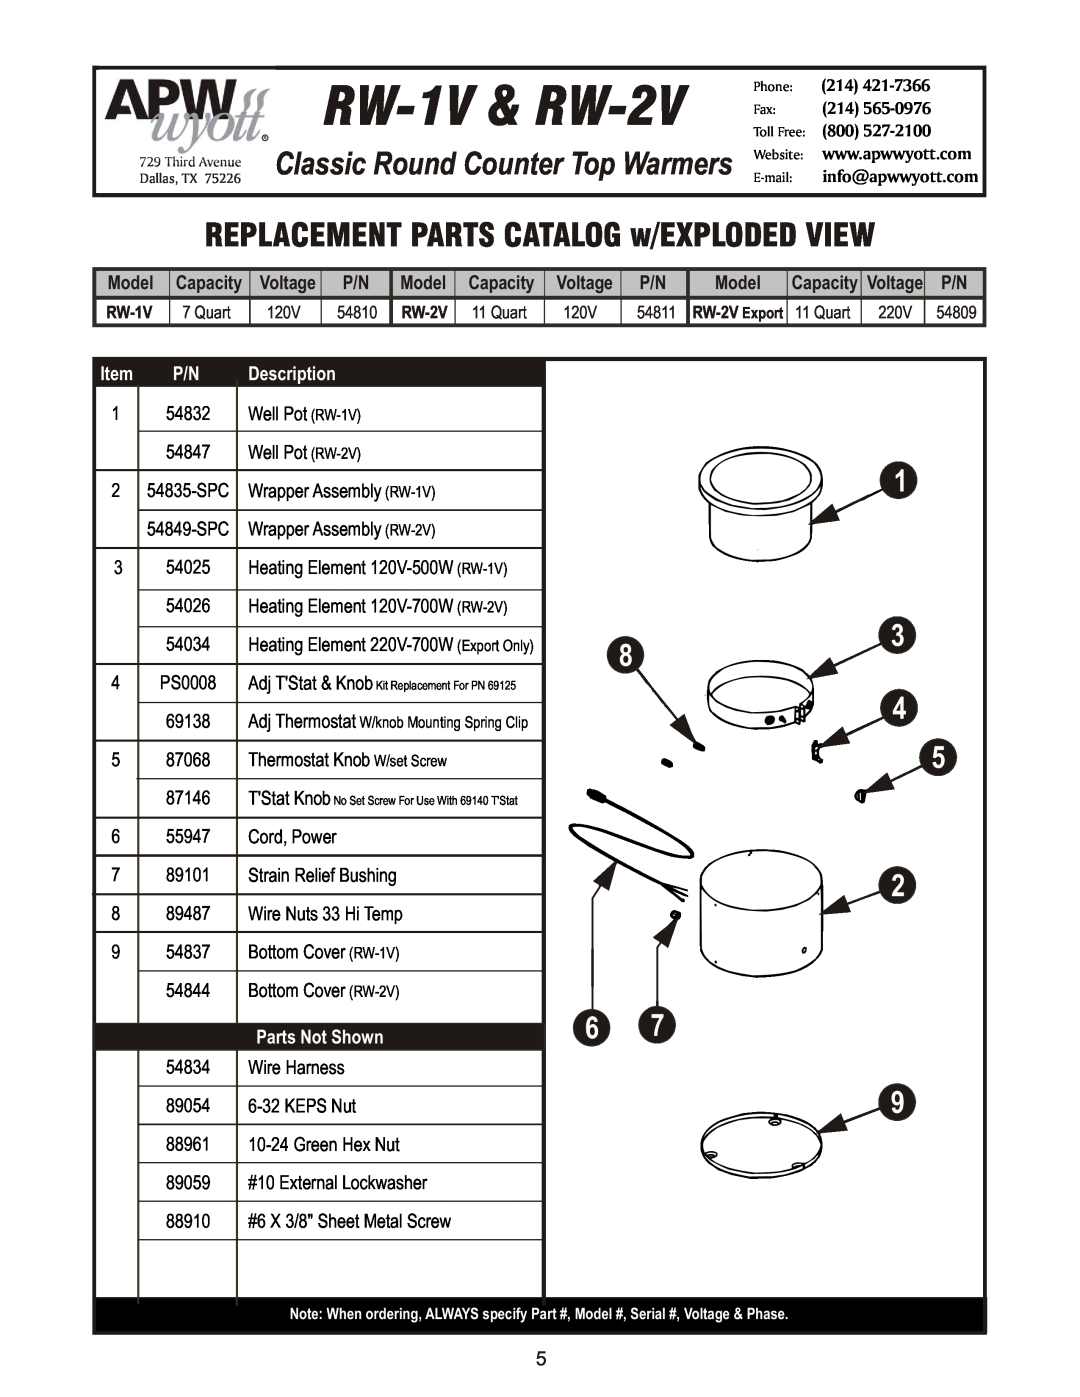 APW Wyott manual RW-1V& RW-2V, REPLACEMENT PARTS CATALOG w/EXPLODED VIEW, 1 3, Classic Round Counter Top Warmers, Model 